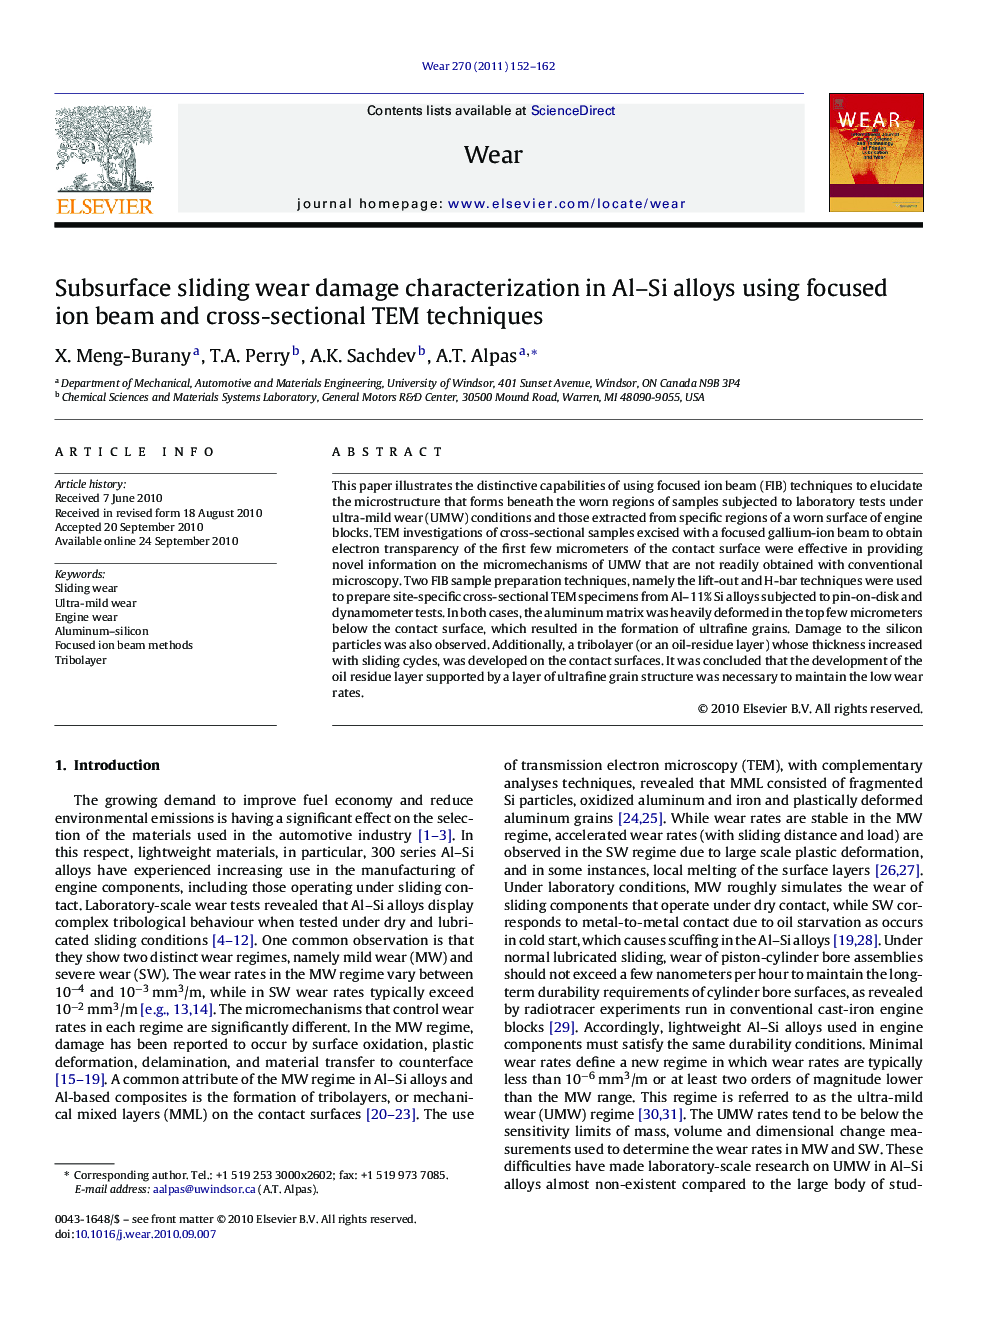 Subsurface sliding wear damage characterization in Al-Si alloys using focused ion beam and cross-sectional TEM techniques